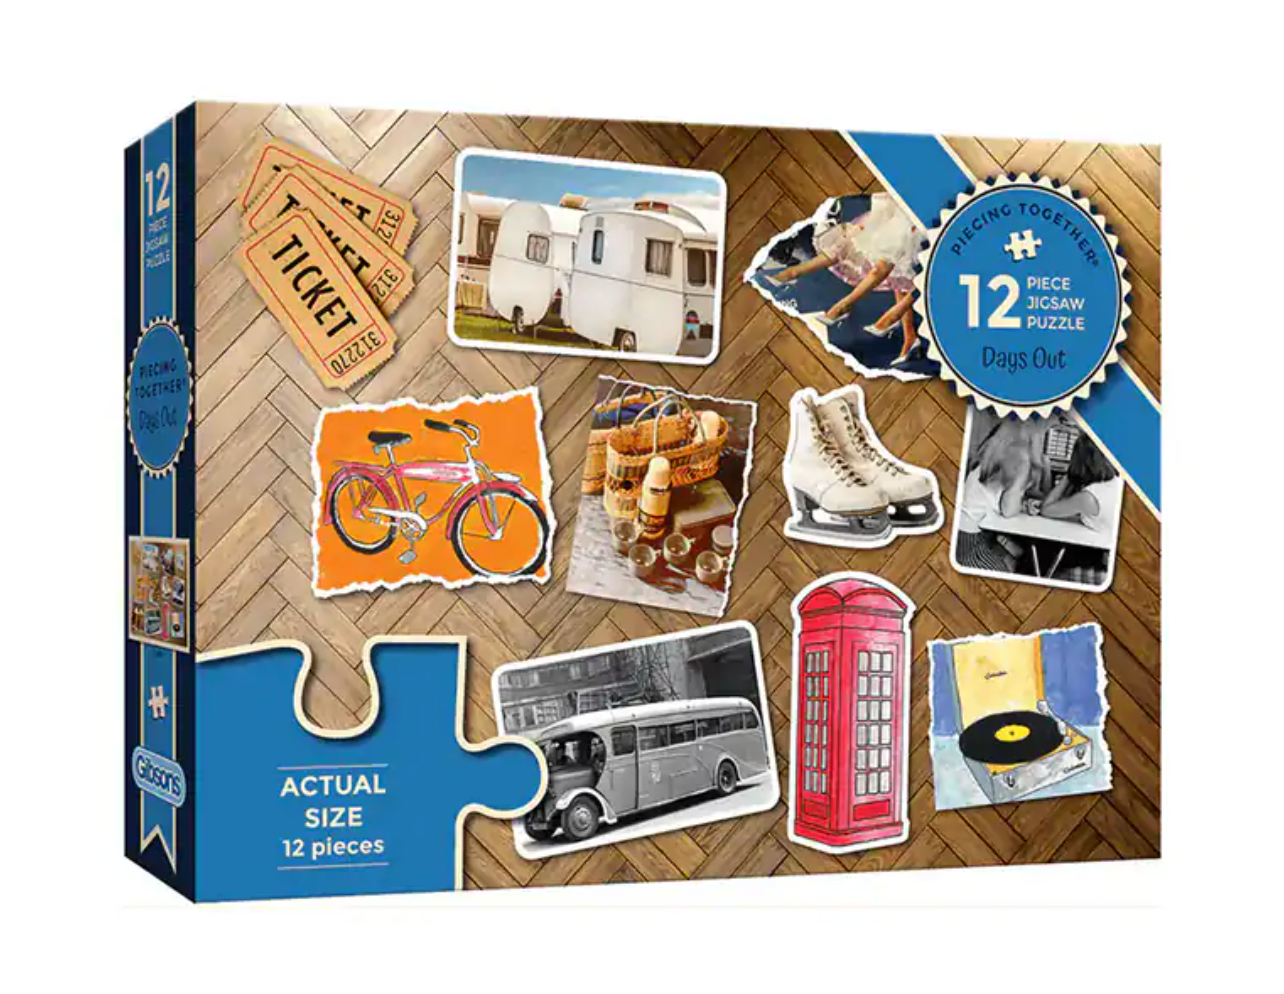 8 Tips For Choosing a Jigsaw Puzzle For Elderly Individuals